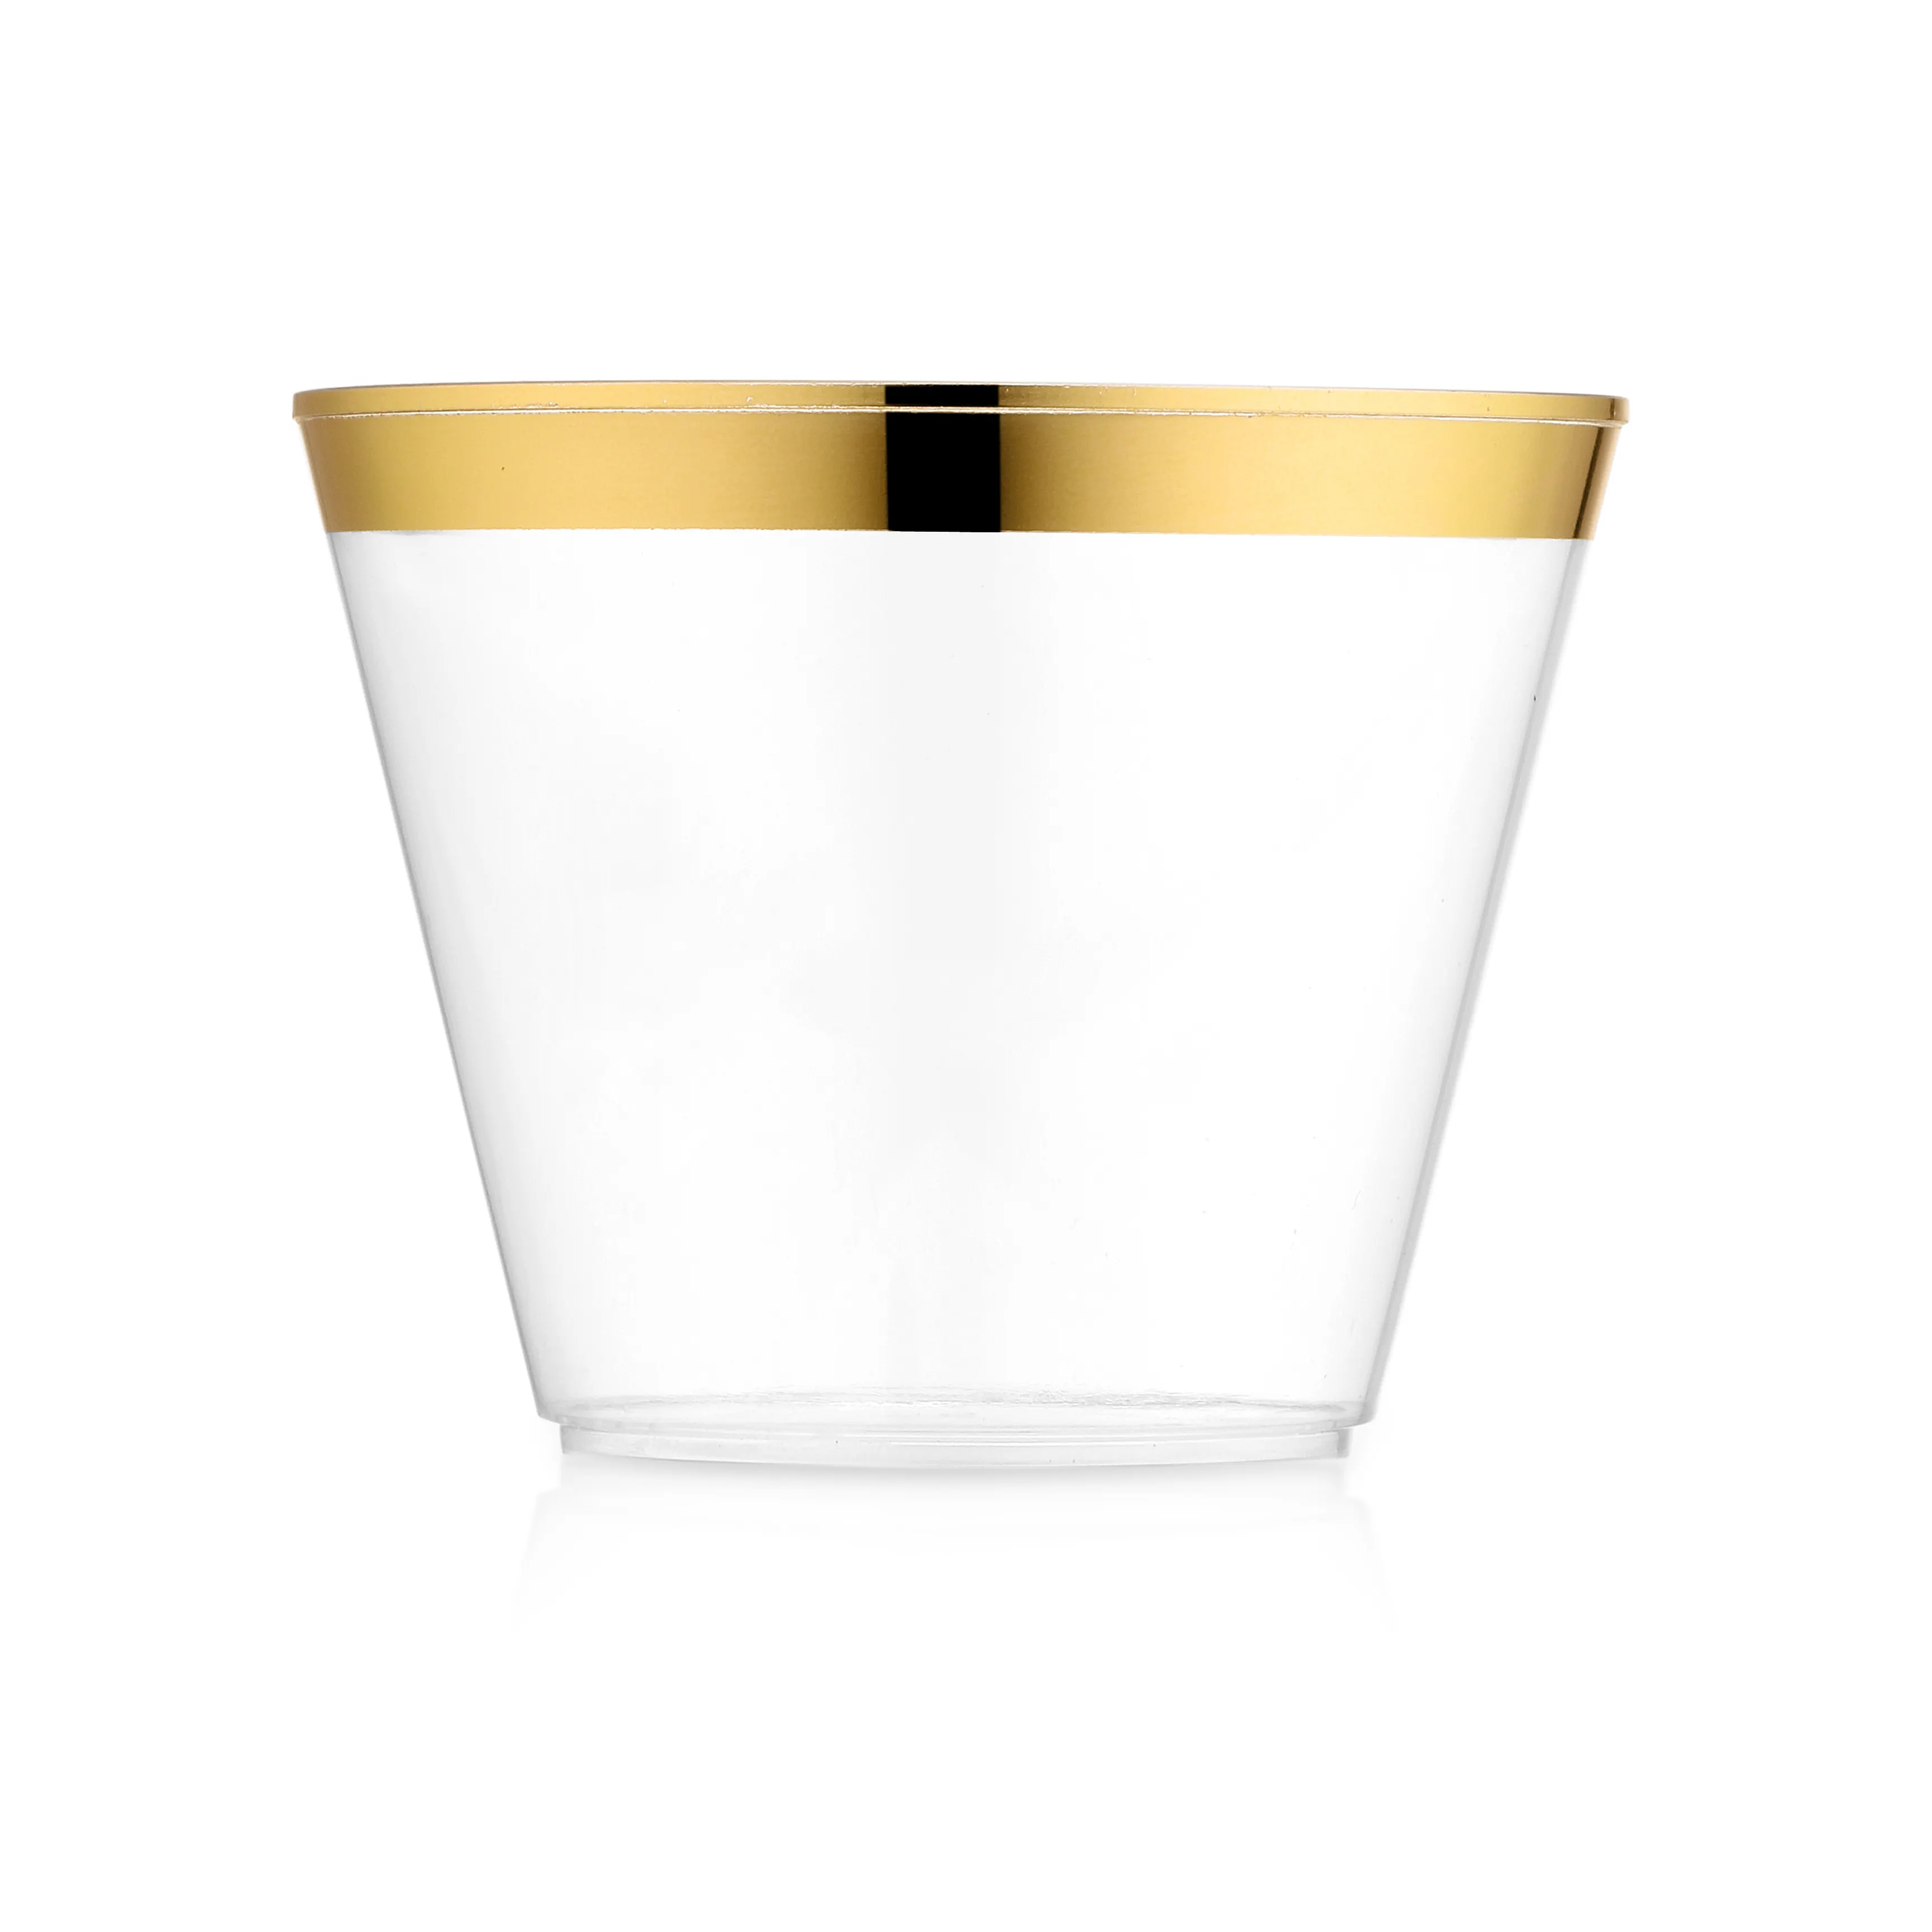 100 Plastic Cups 9 Oz Gold Plastic Cup Old Fashioned Tumblers Gold Rimmed Plastic Cups for Party Decorations